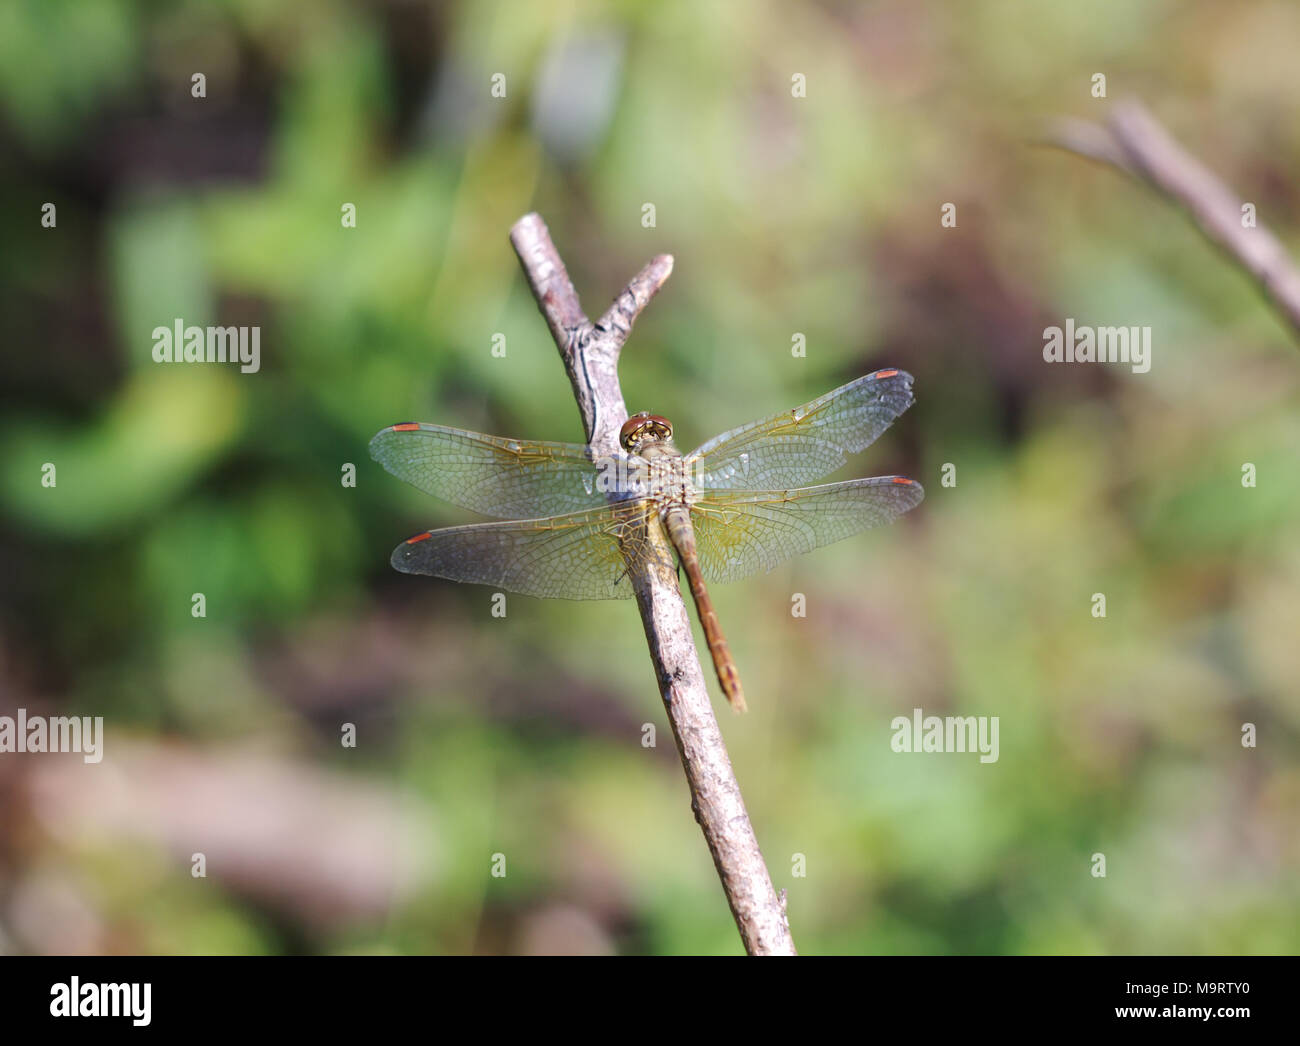 Brown dragonfly (Aeschna grandis) sitting on a wooden stick, close-up, selective focus Stock Photo